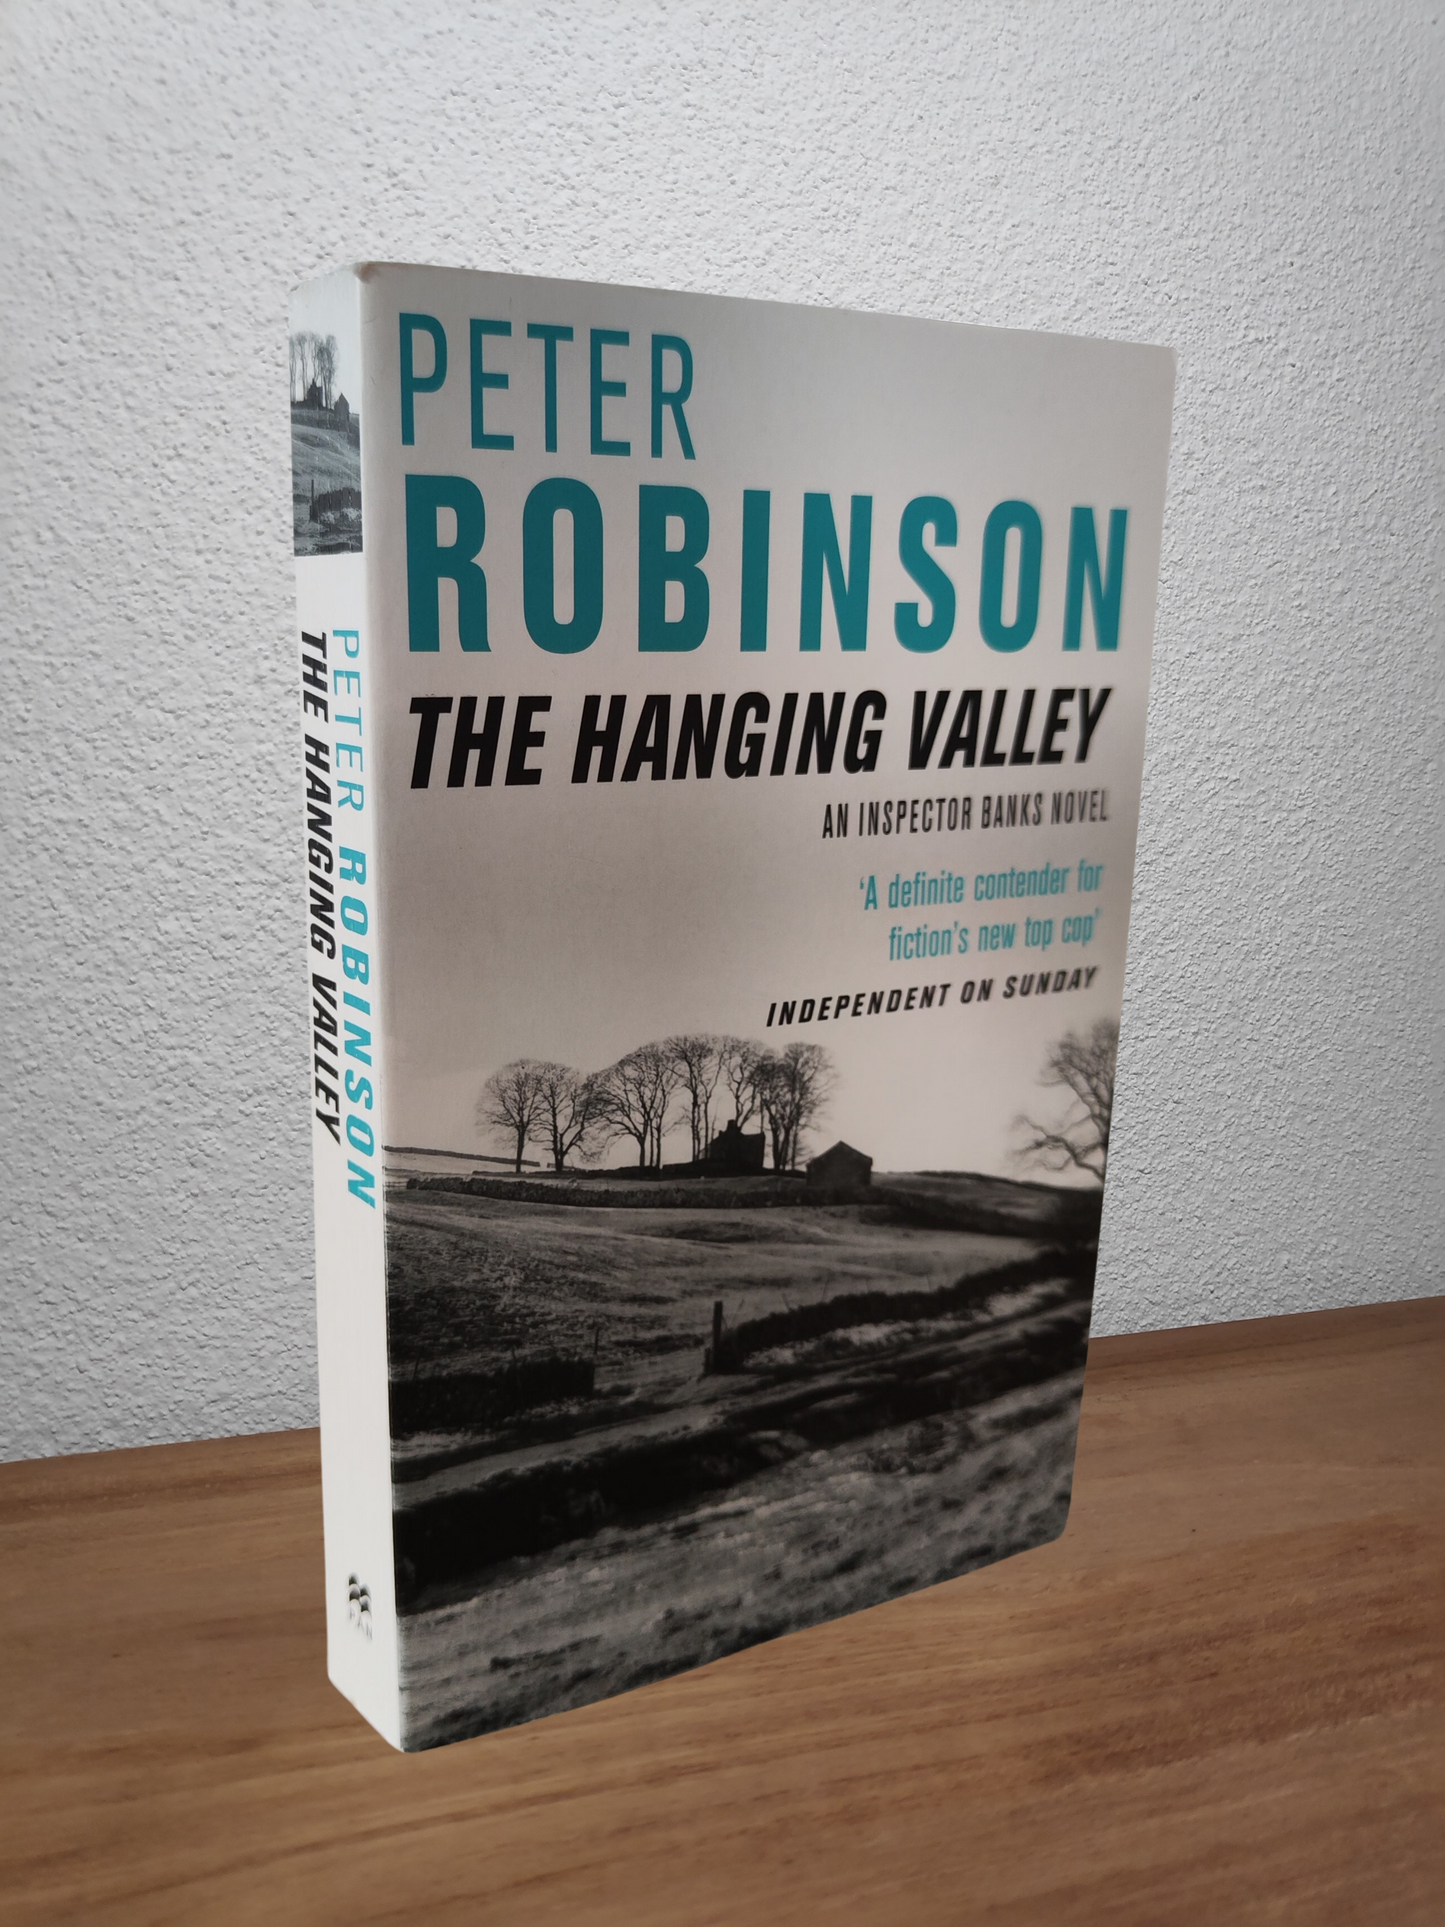 Peter Robinson - The Hanging Valley (Inspector Banks #4)